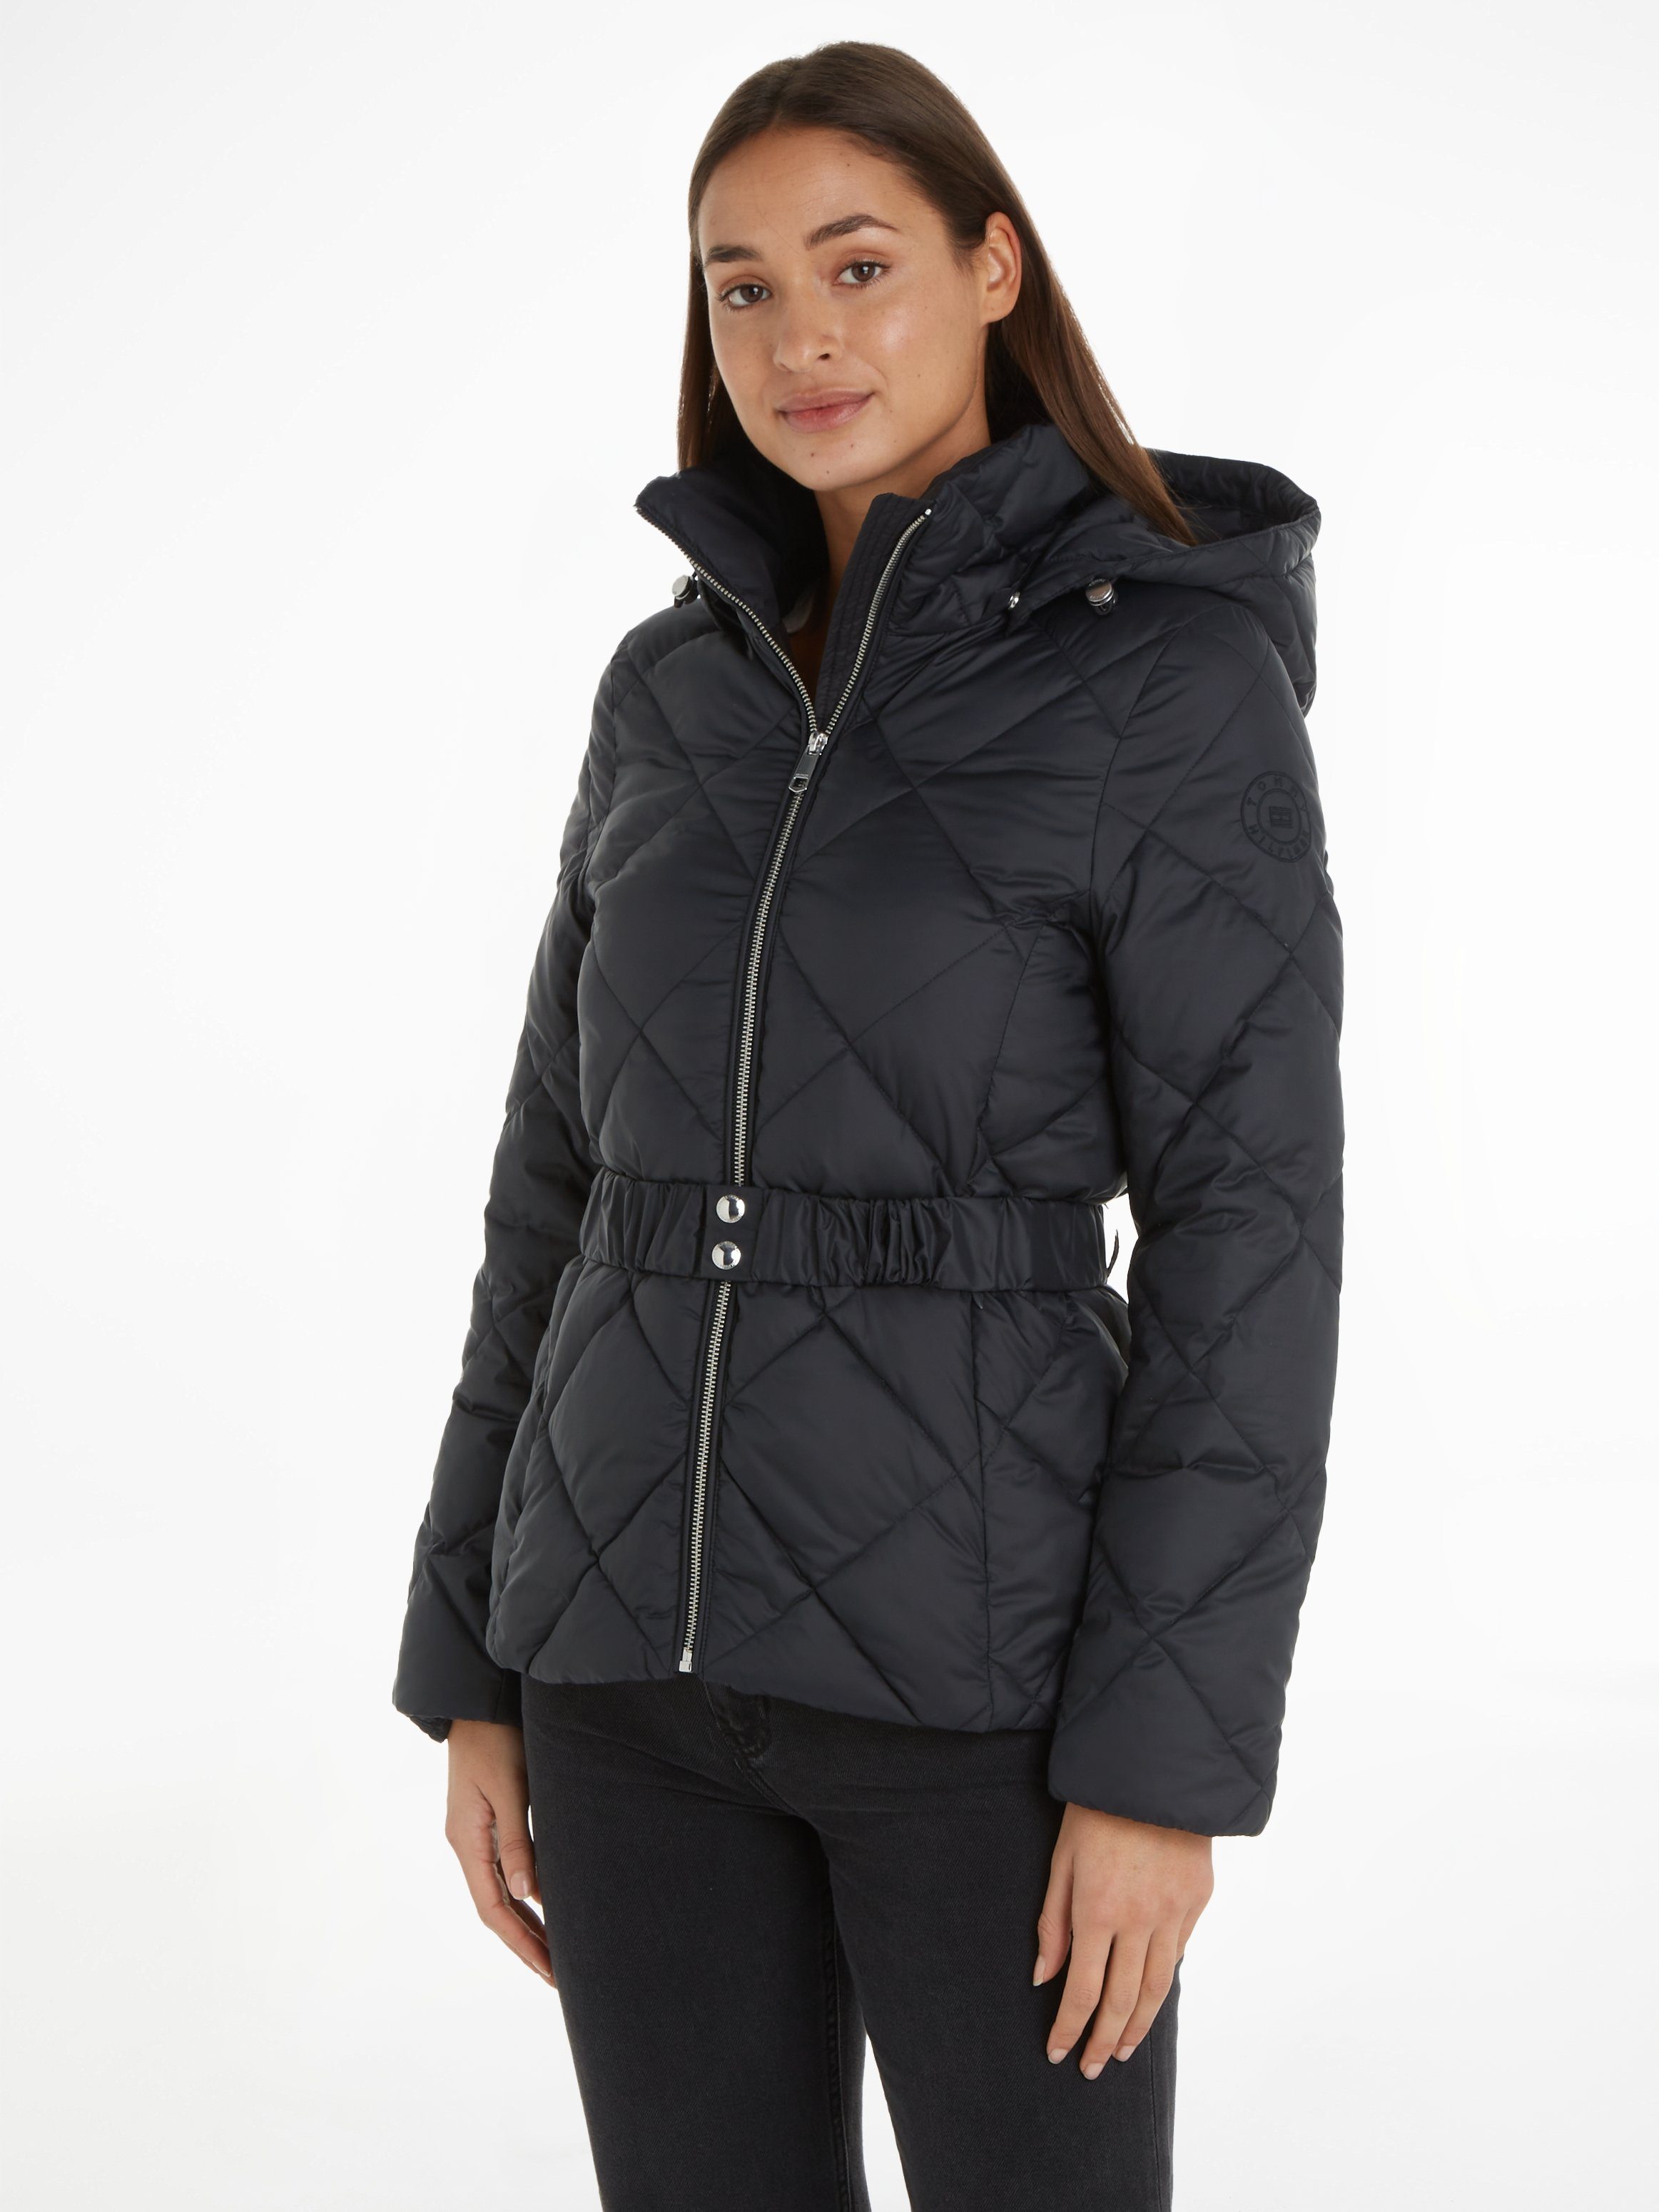 JACKET Logostickerei ELEVATED QUILTED Steppjacke Tommy mit Hilfiger BELTED